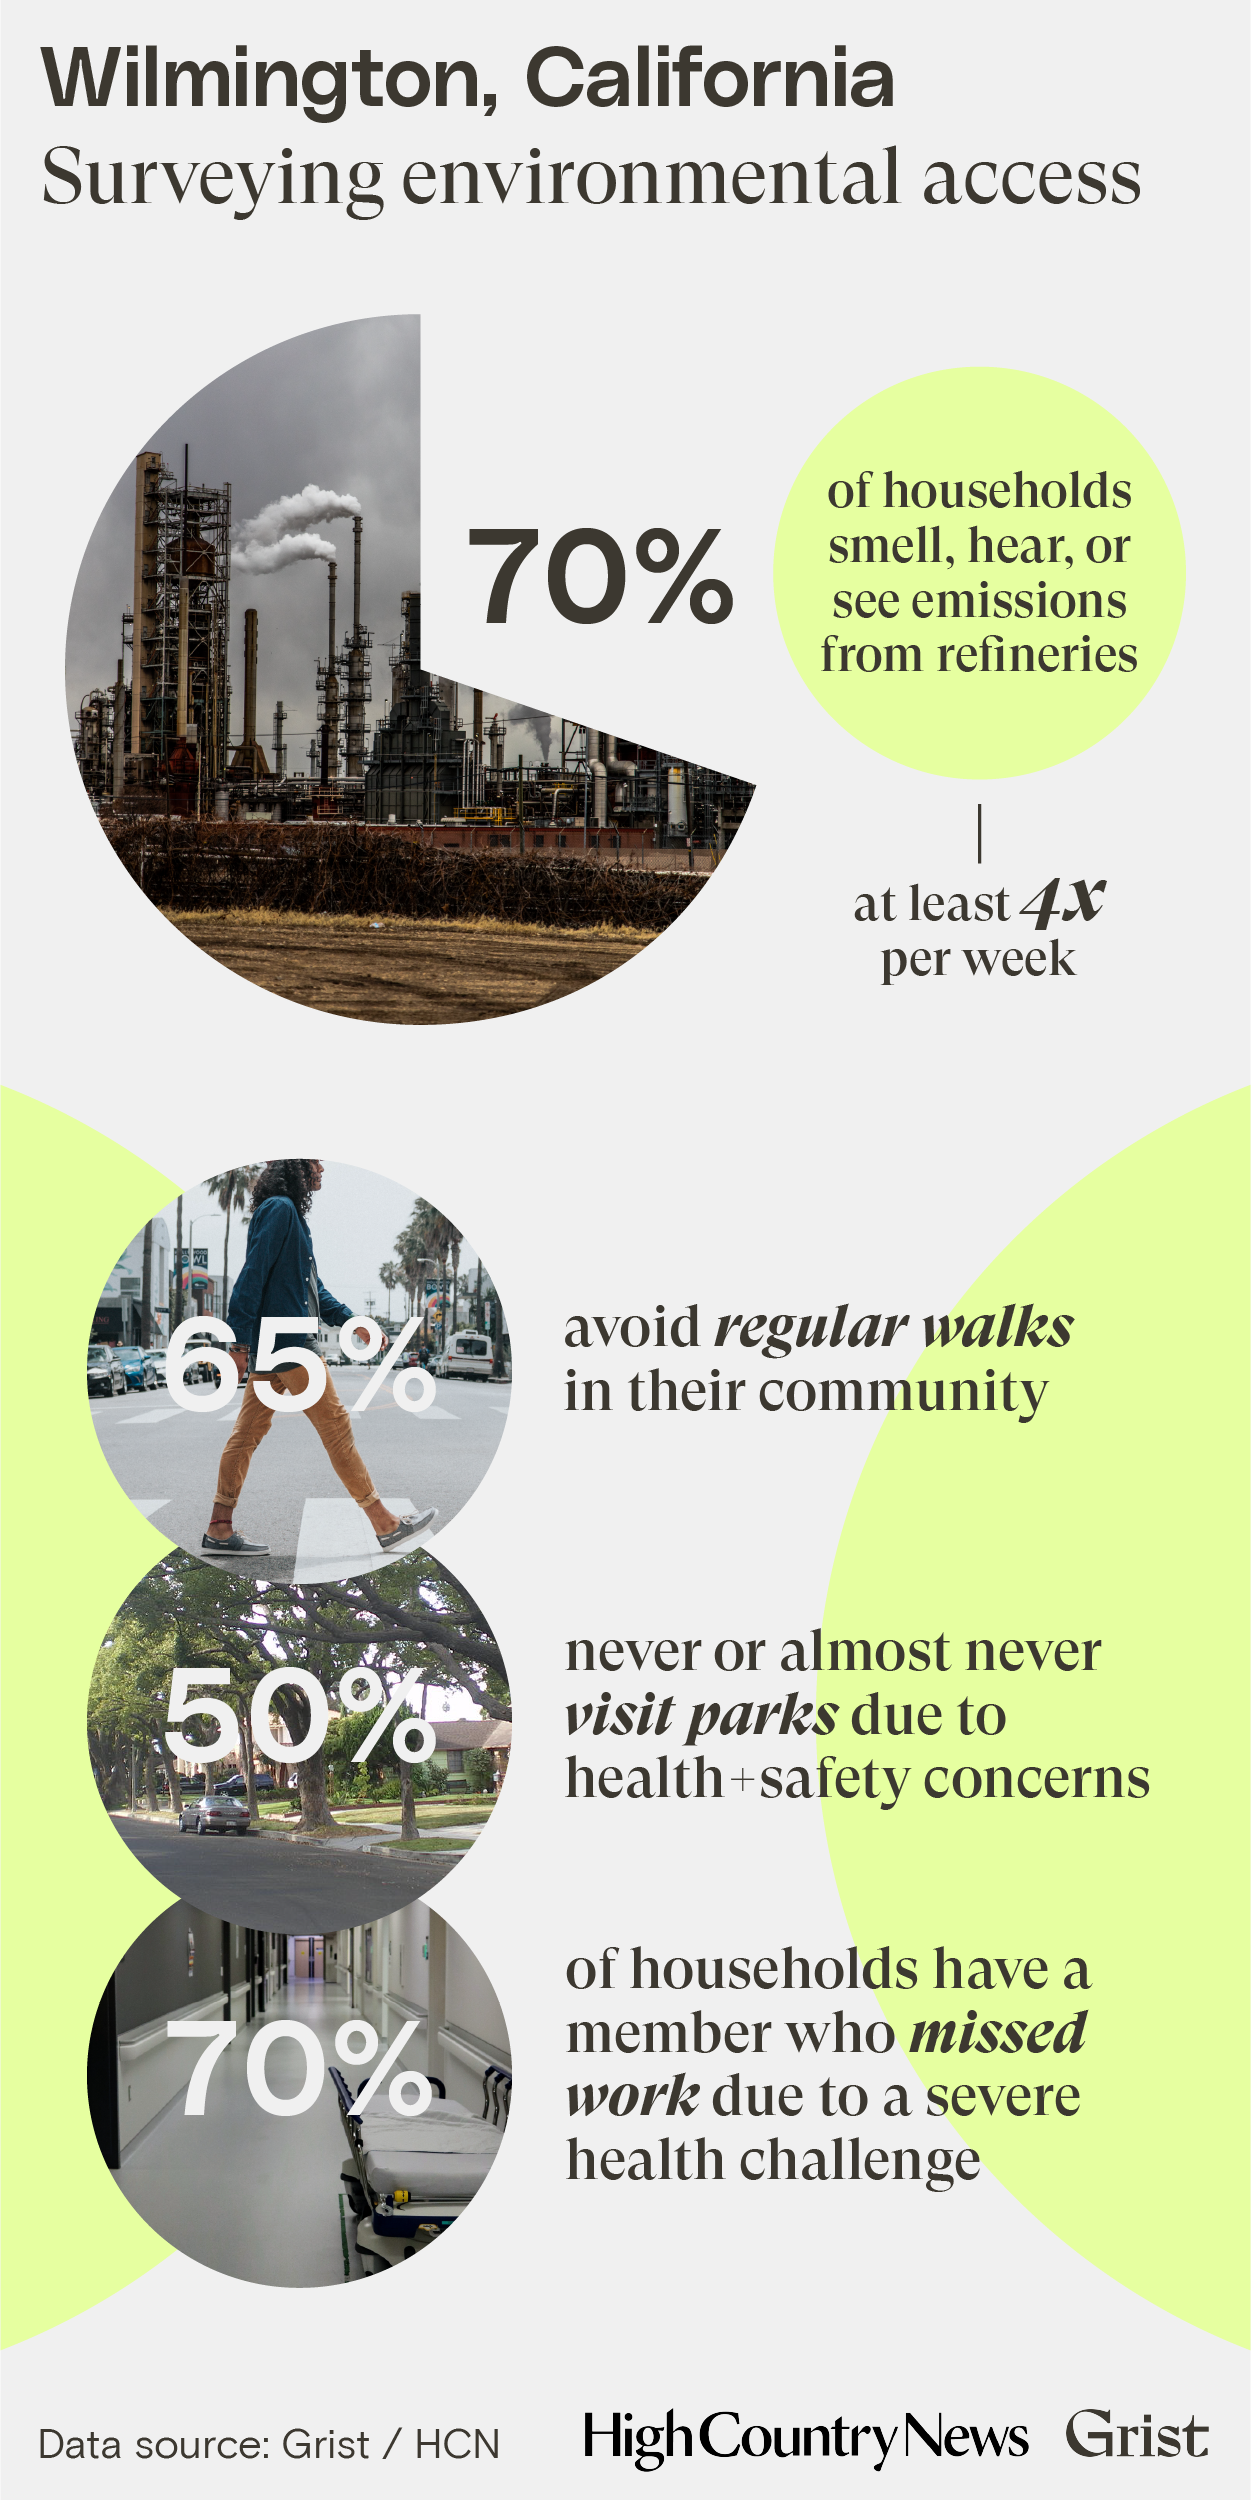 An infographic reporting the results of a survey of environmental access in Wilmington, California. 70% of households smell, hear, or see emissions from refineries at least 4x per week. 65% avoid regular walks in their community. 50% never or almost never visit parks due to health and safety concerns. 70% of households have a member who missed work due to a severe health challenge.